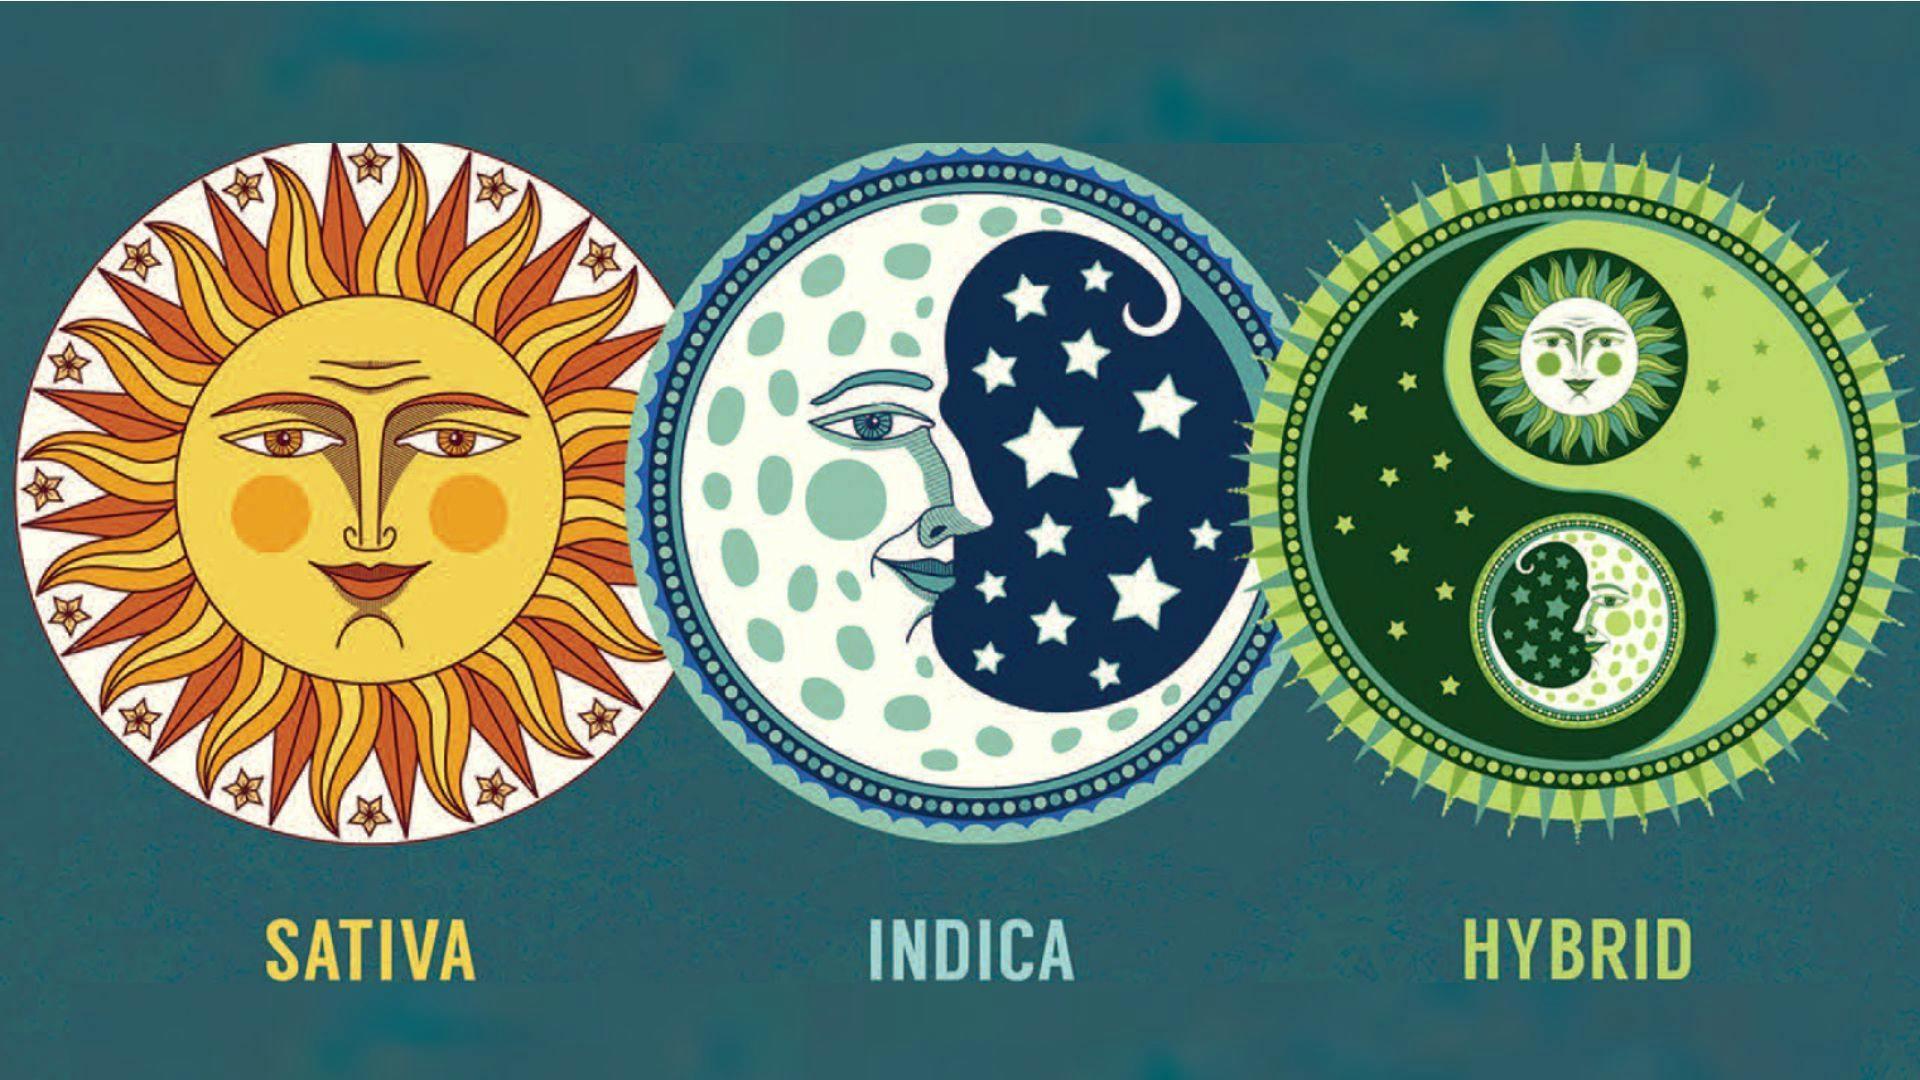 a graphic of an illustrated sun with the word sativa, an illustrated moon with the word indica and an illustrated tao symbol and with word hybrid.